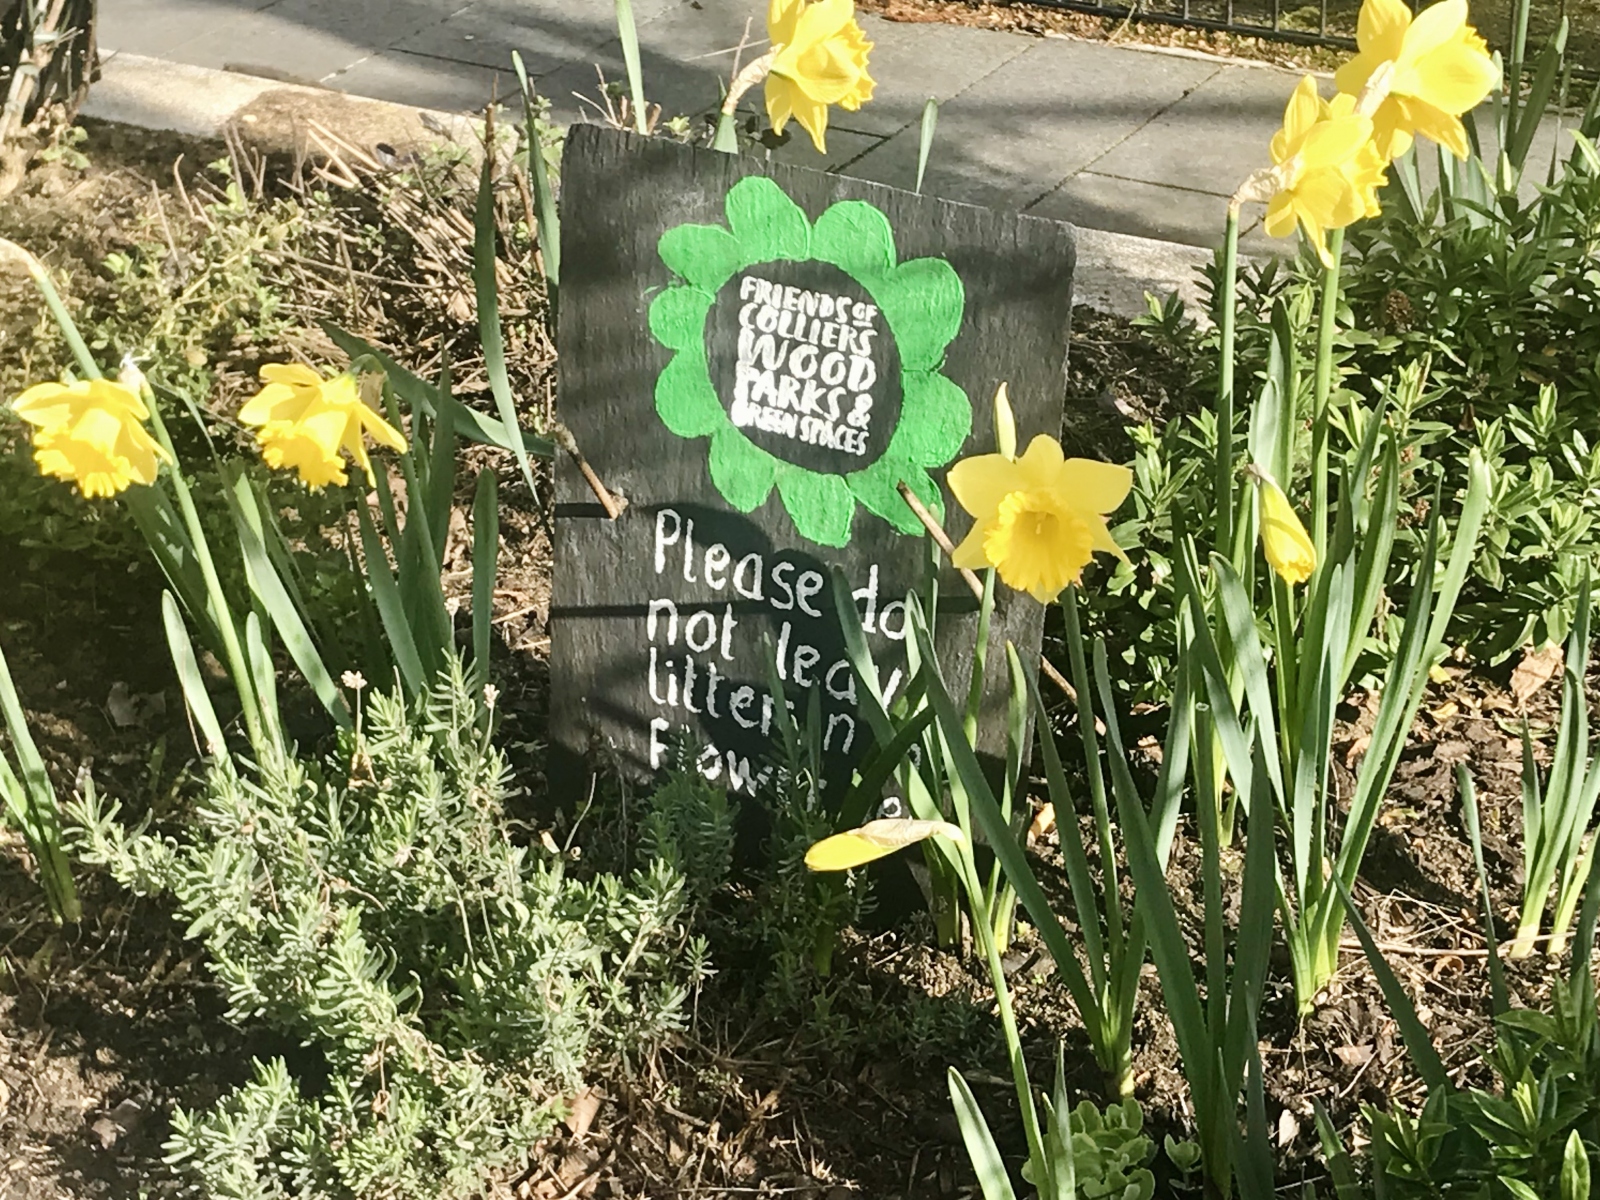 Daffodils and signage in Spring 2021 in Baltic Close